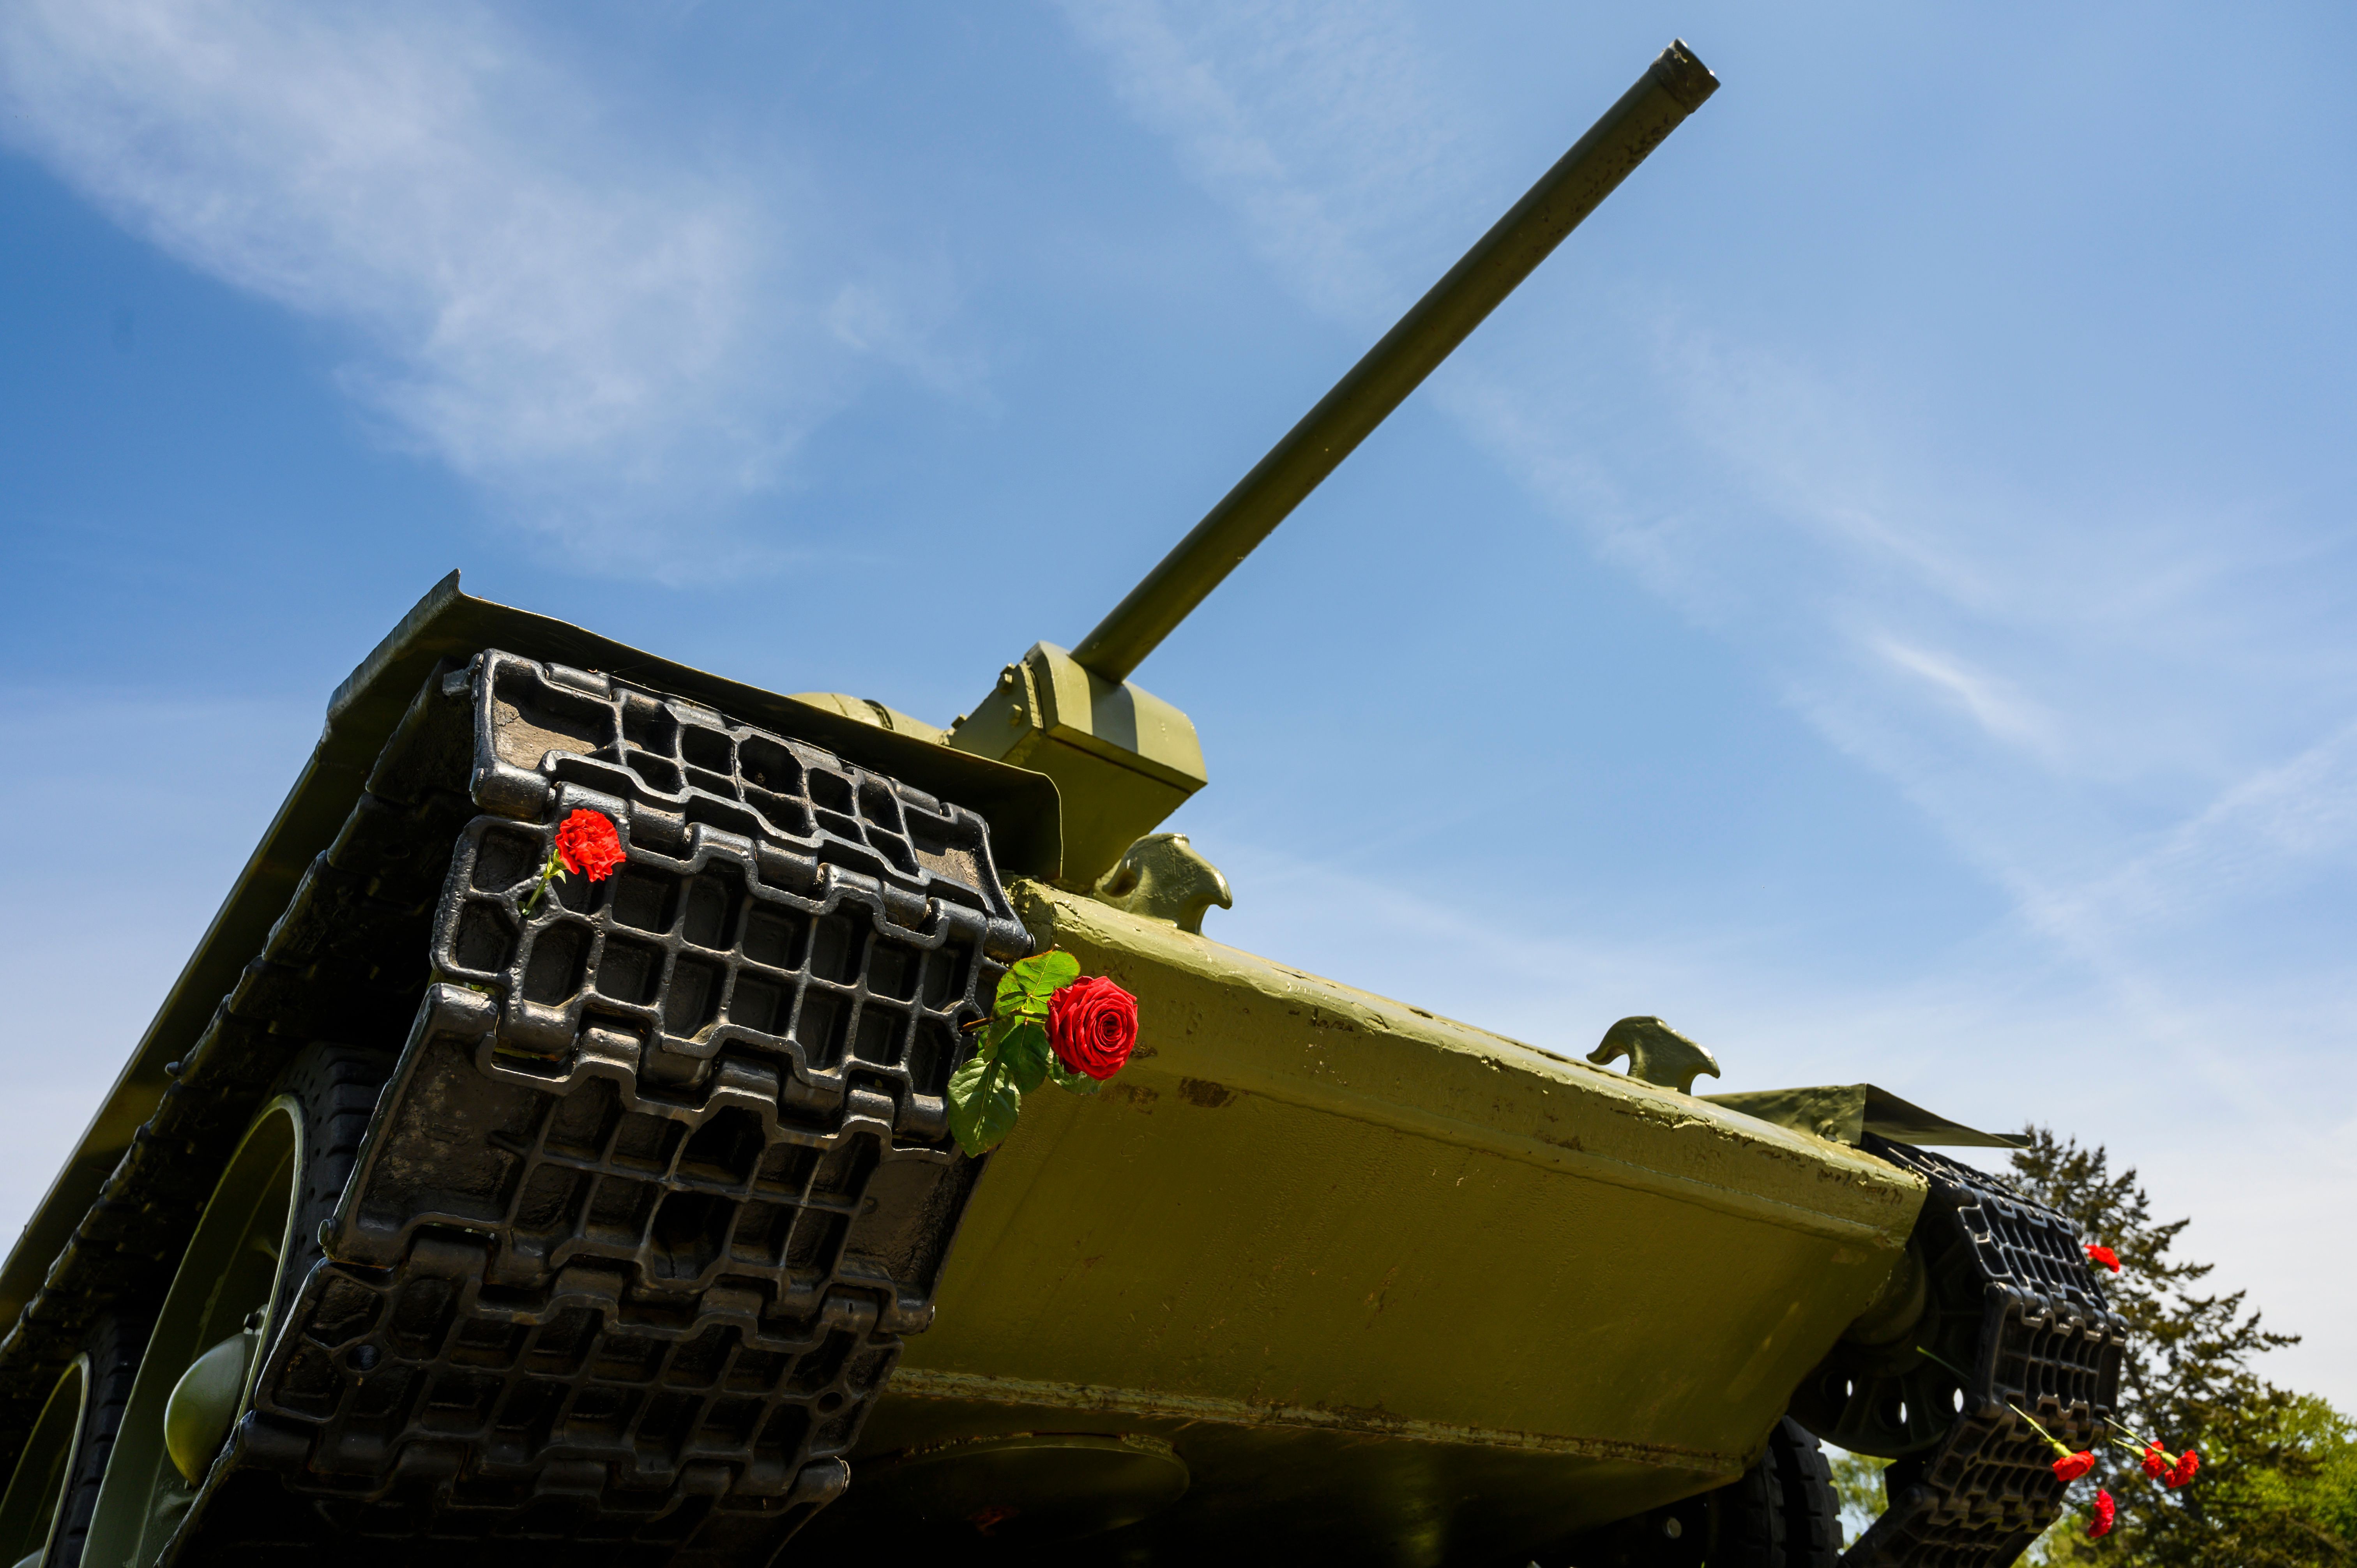 The Soviet Tank That Changed the World